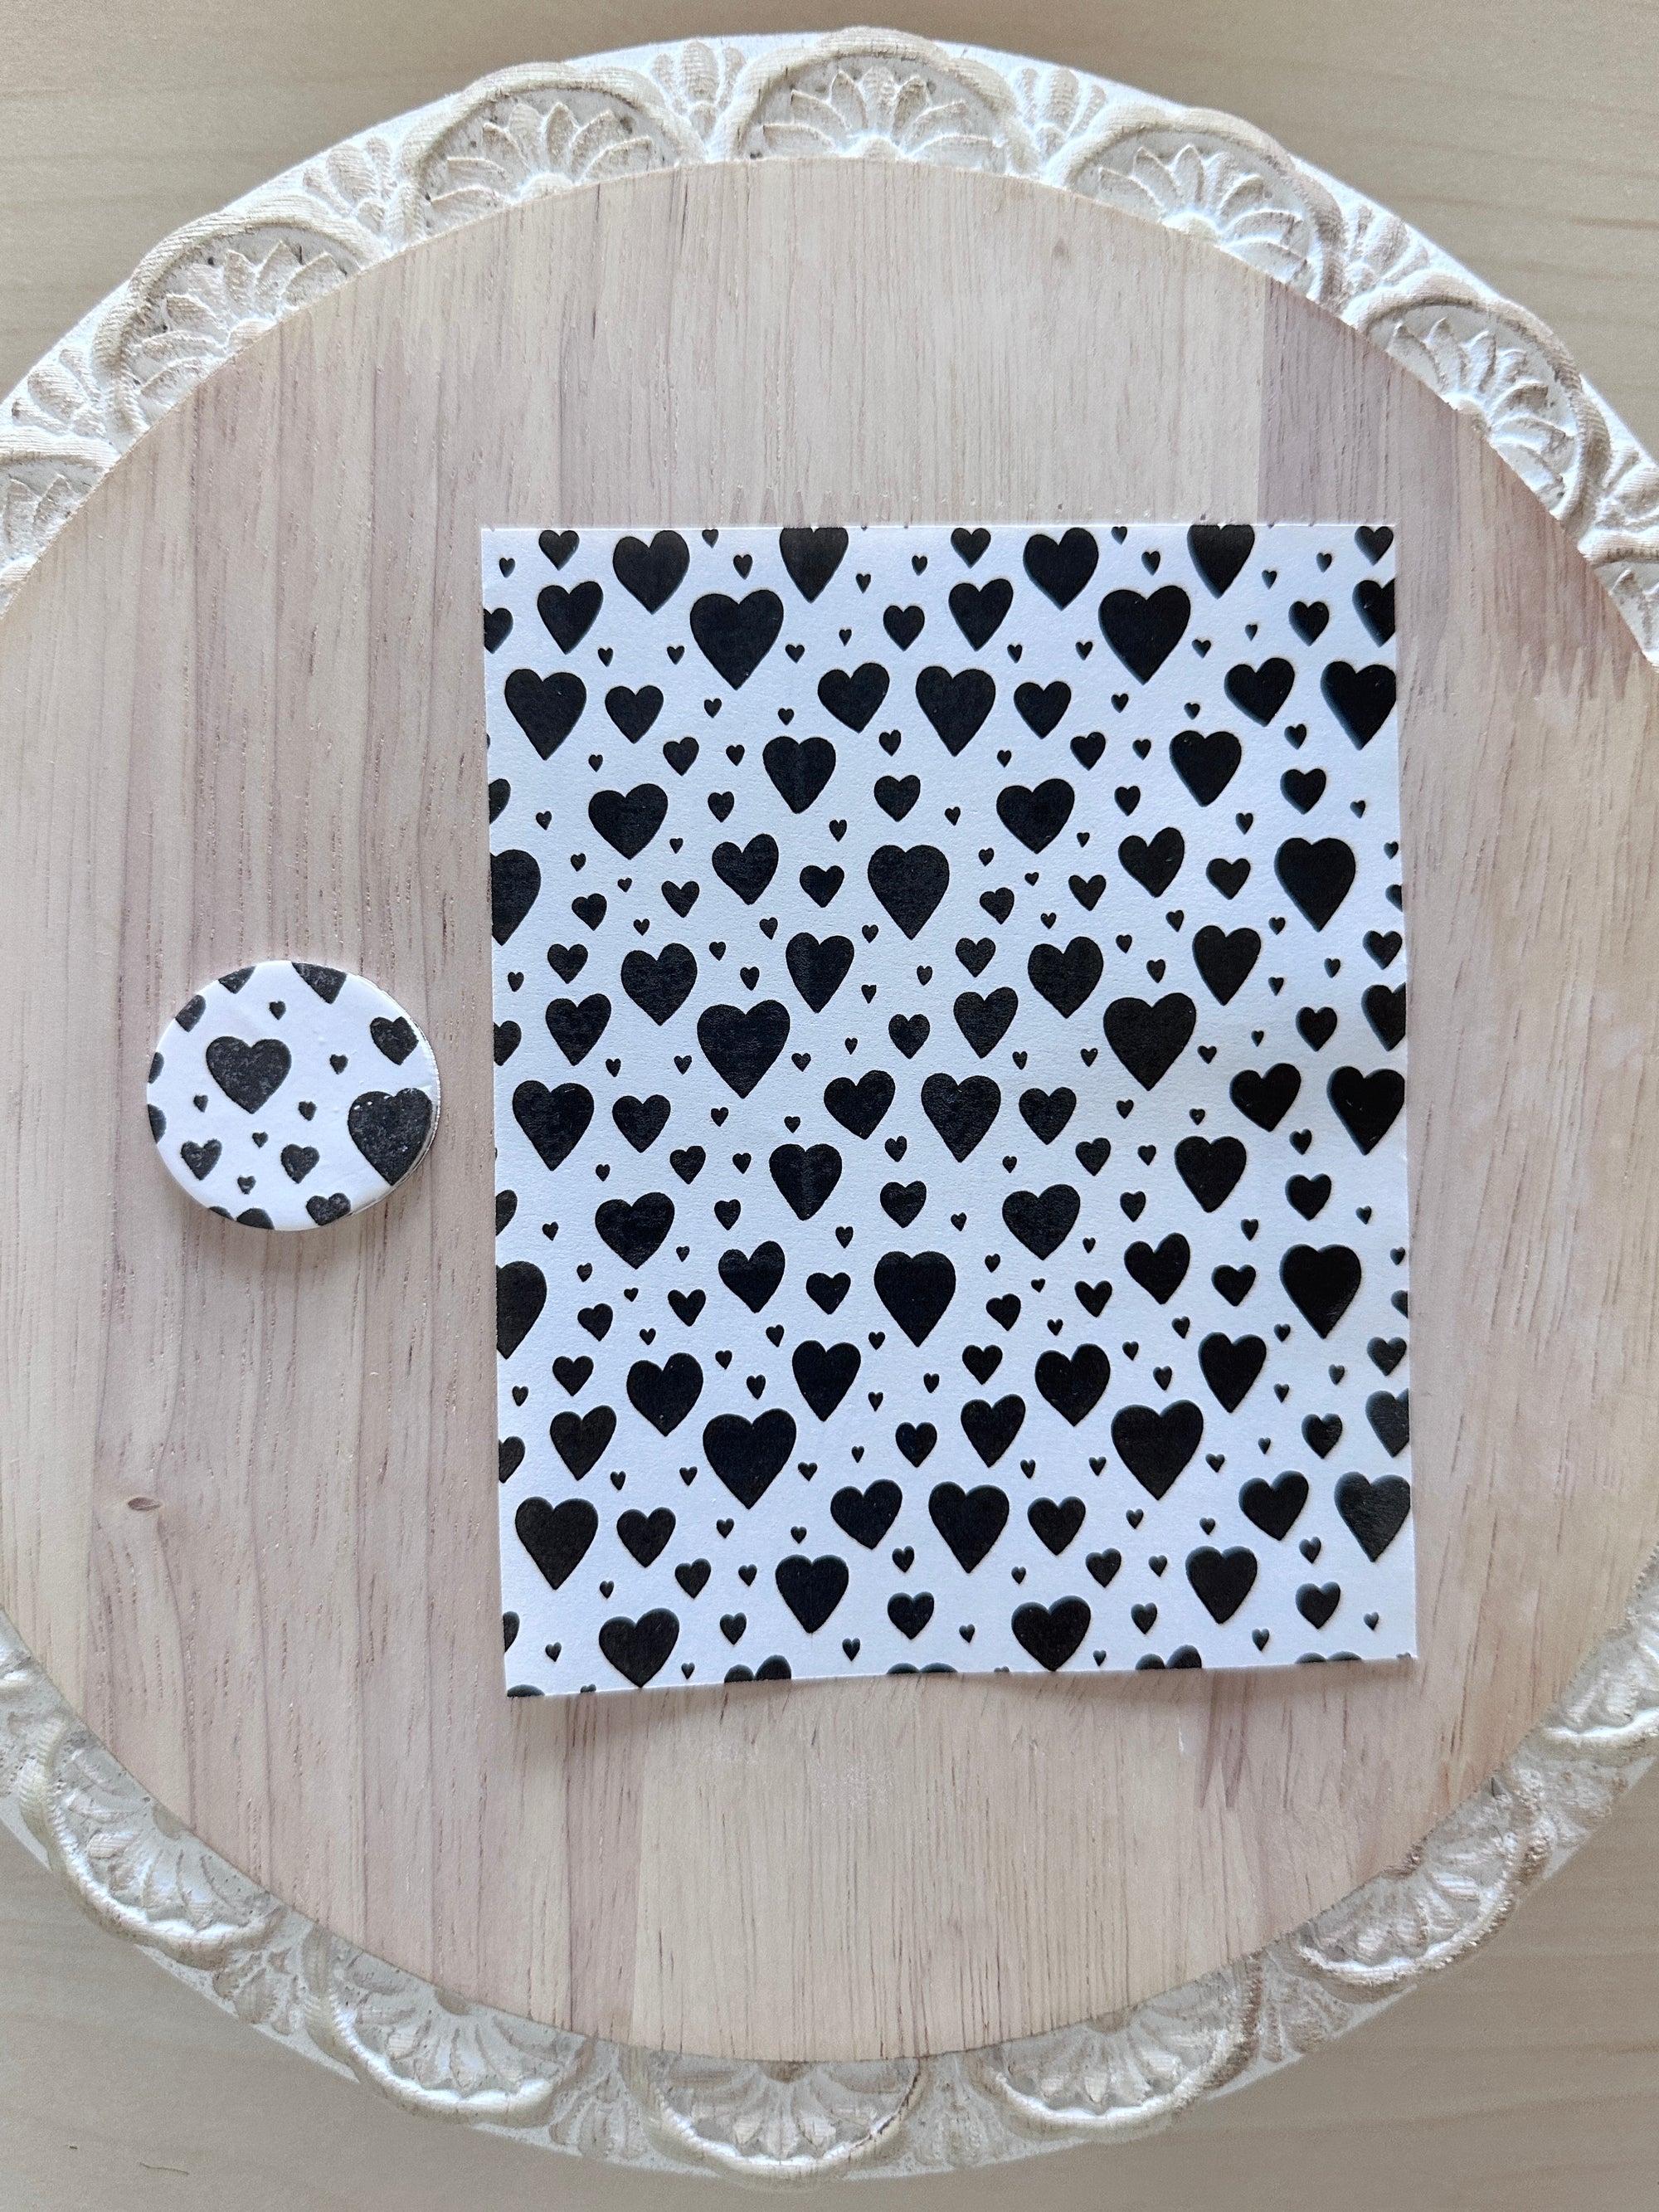 Black and White Hearts Water Soluble Transfer Sheet for Polymer Clay